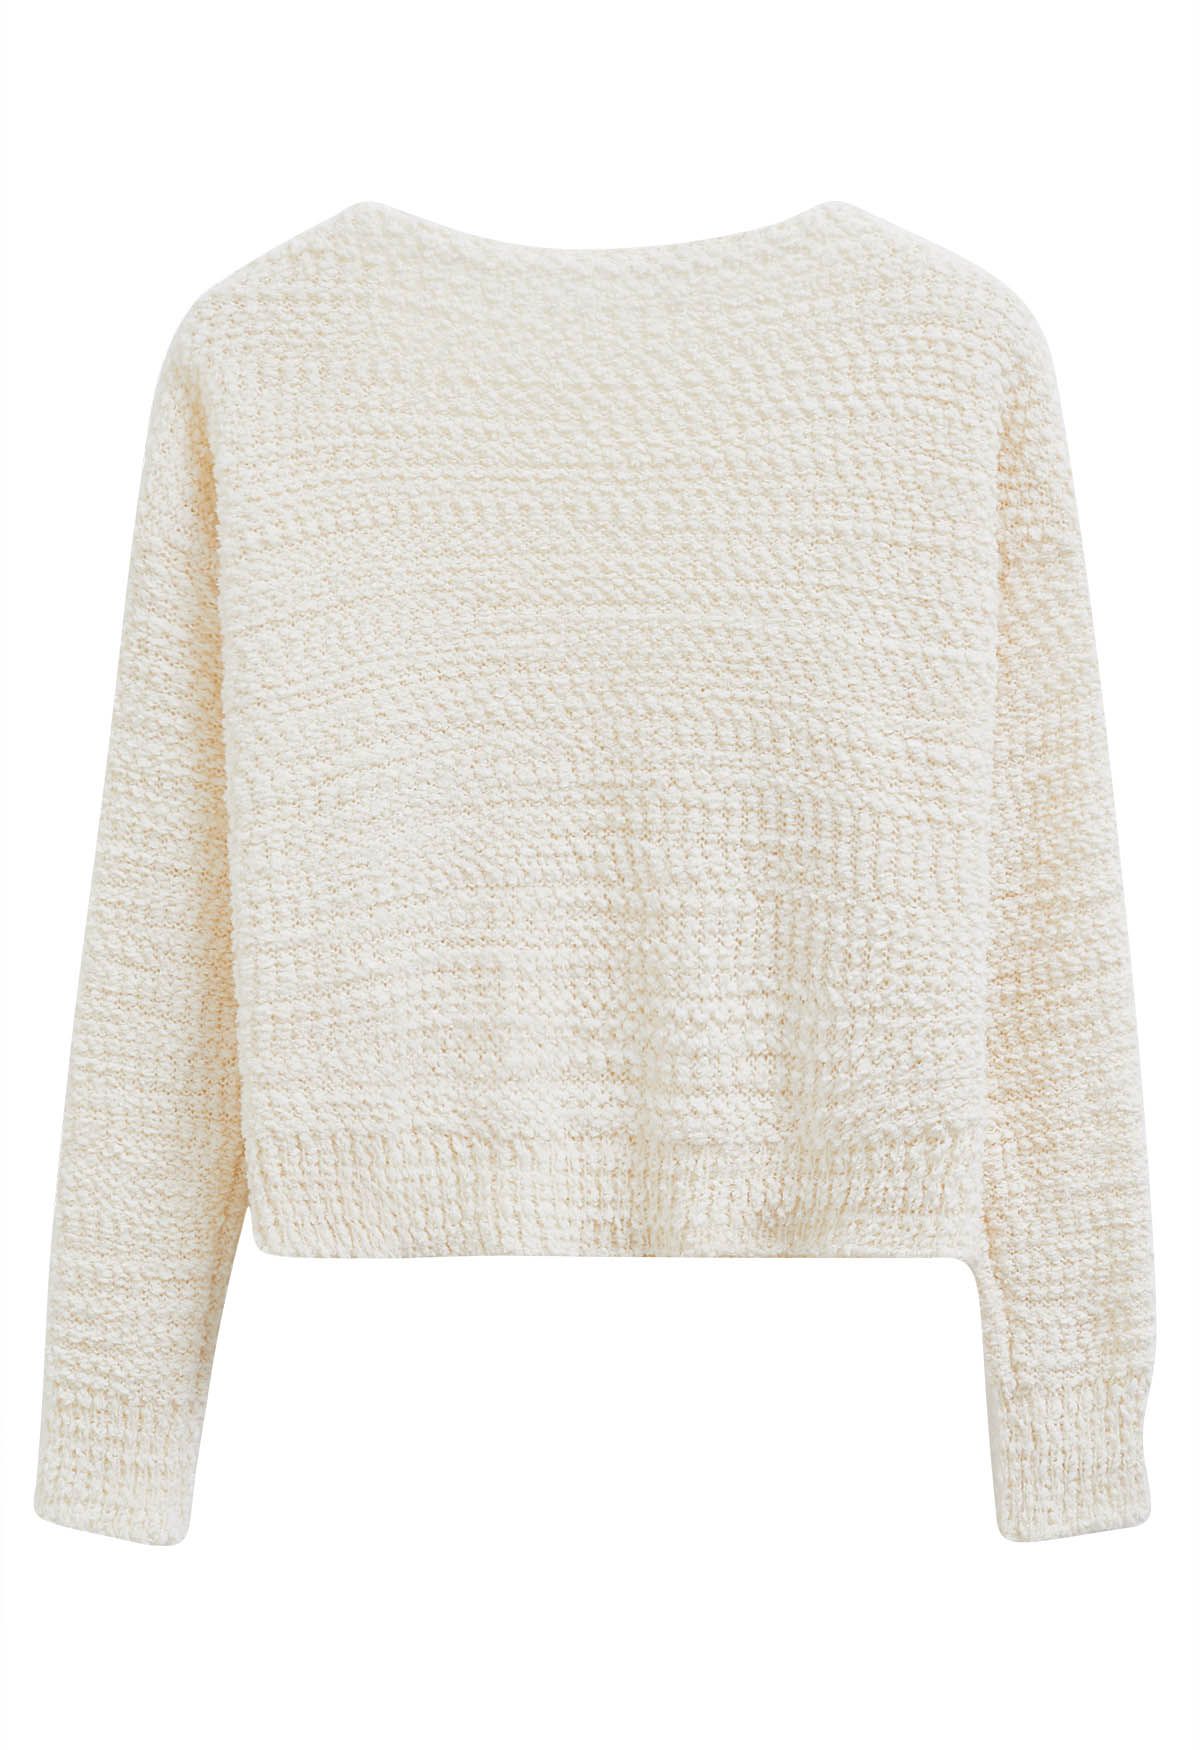 V-Neck Comfy Knit Sweater in Cream